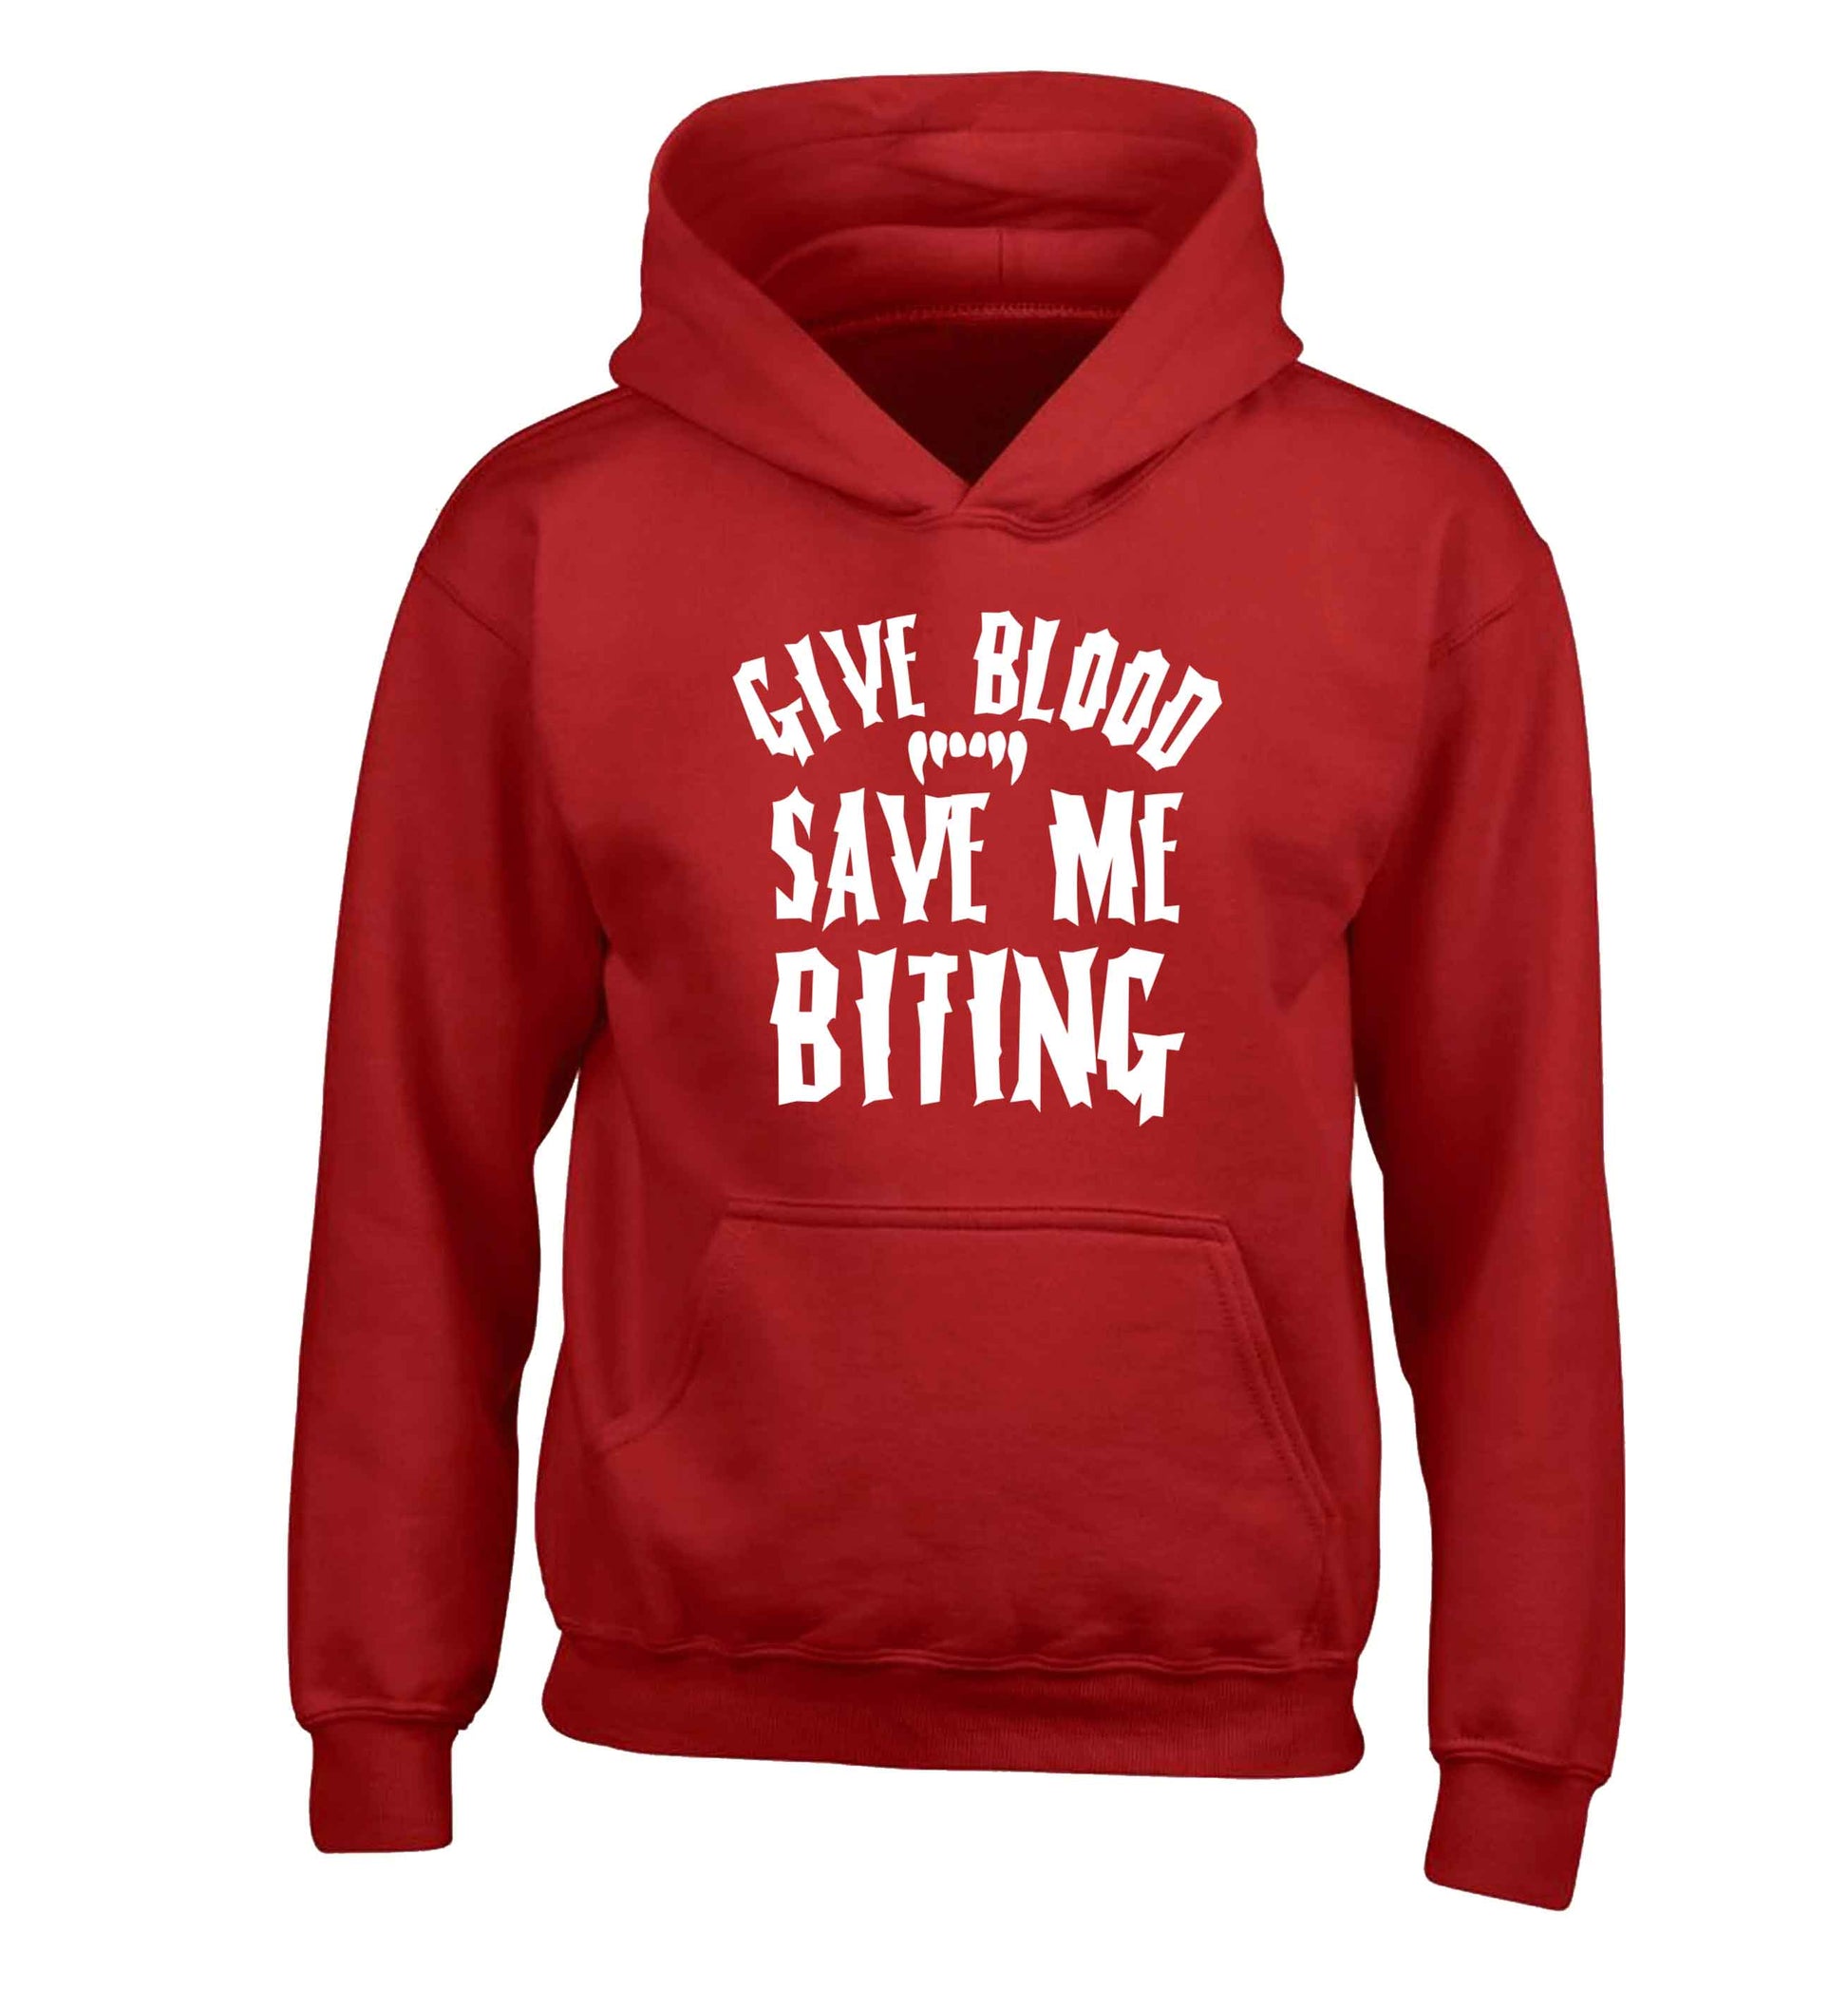 Give blood save me biting children's red hoodie 12-13 Years